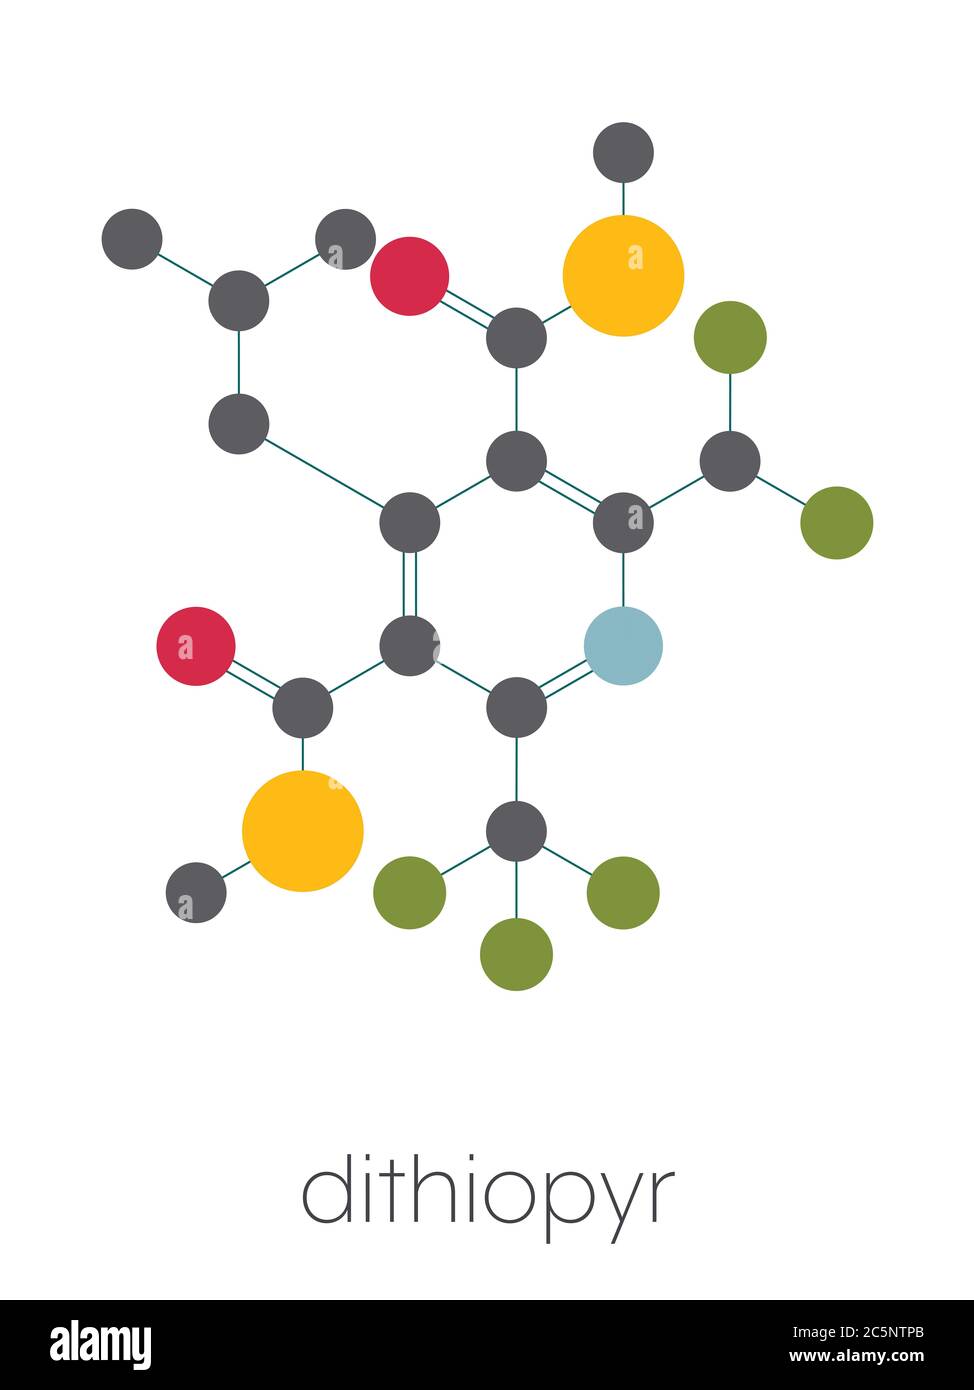 Dithiopyr preemergent herbicide molecule. Stylized skeletal formula (chemical structure): Atoms are shown as color-coded circles: hydrogen (hidden), carbon (grey), oxygen (red), nitrogen (blue), sulfur (yellow), fluorine (cyan). Stock Photo